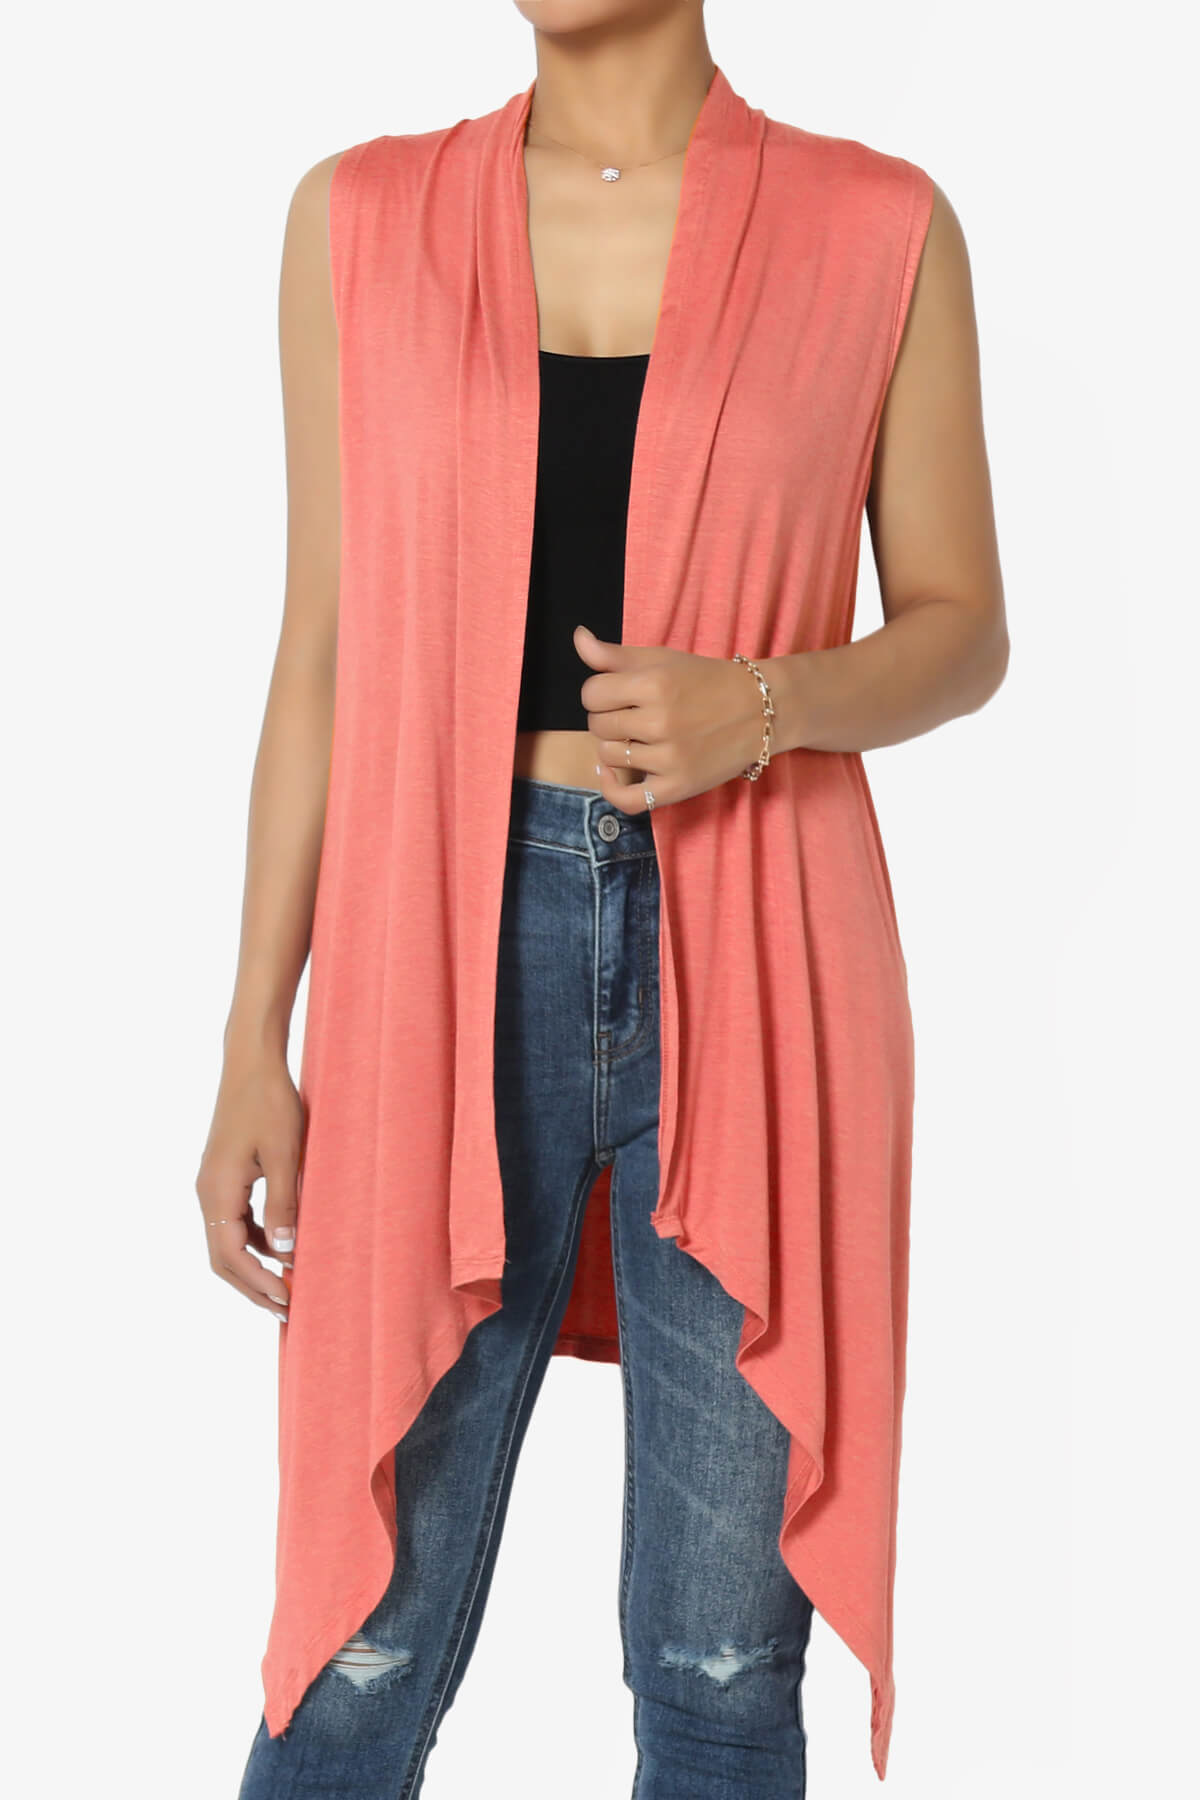 TAYSOM%20DRAPED%20OPEN%20FRONT%20SLEEVELESS%20CARDIGAN%20VEST CORAL_1